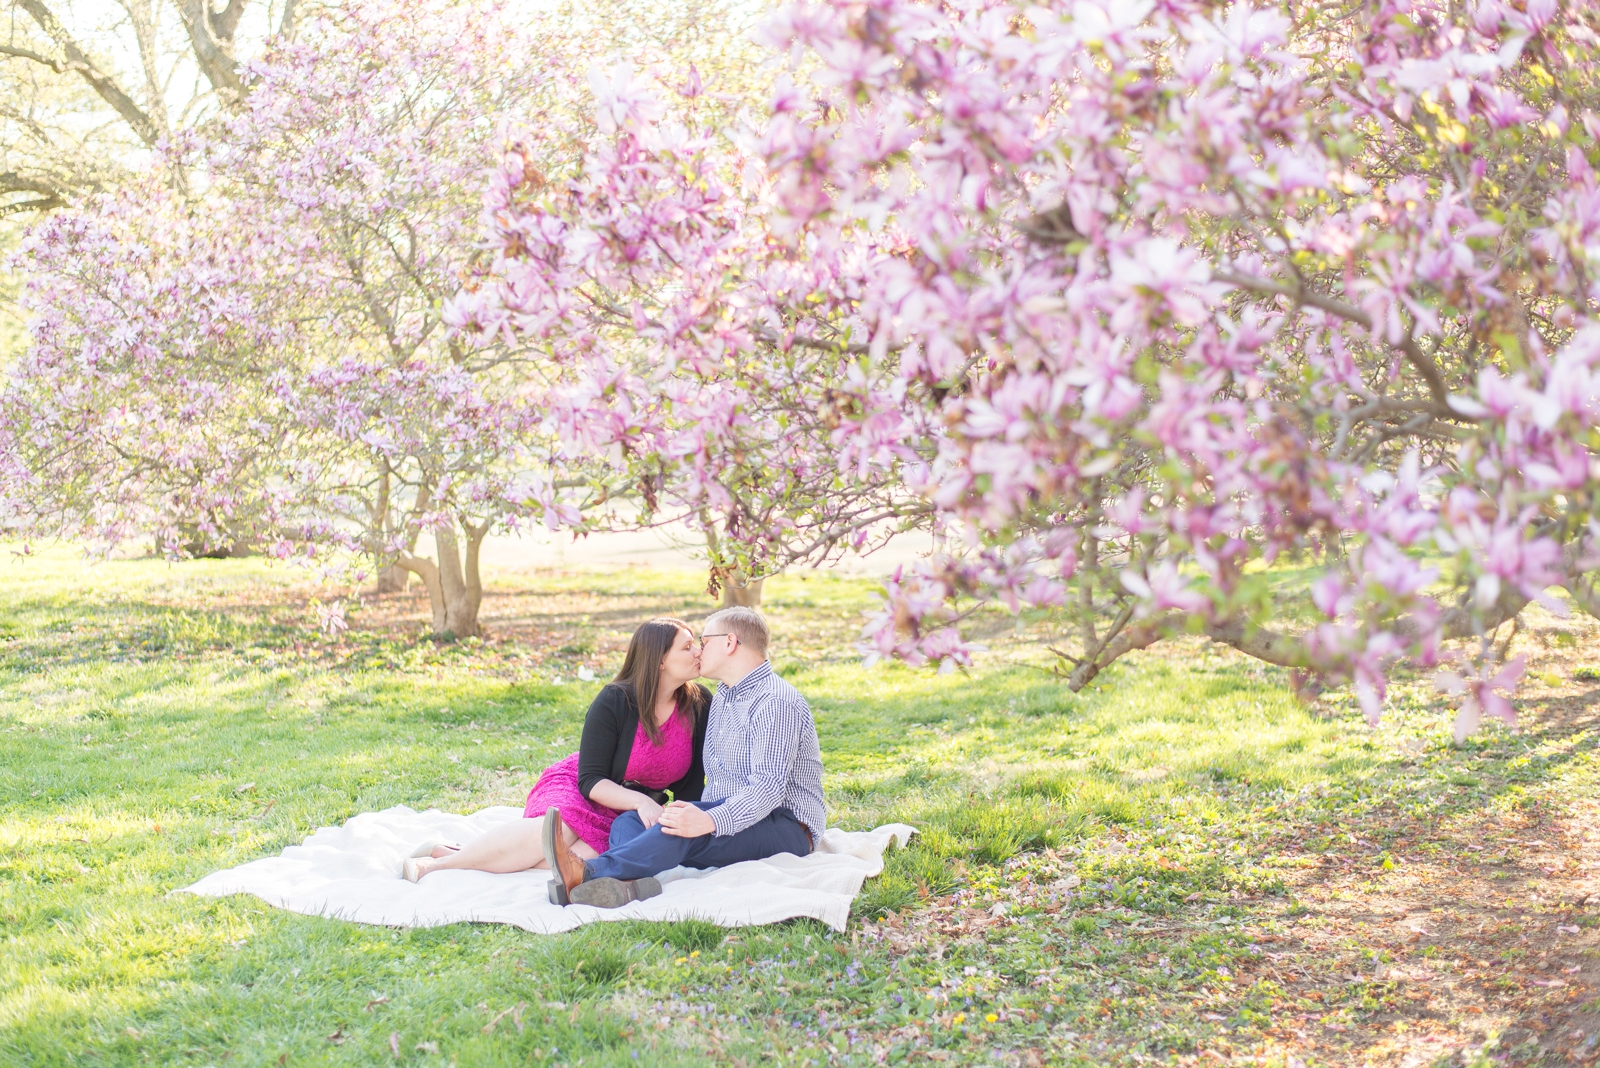 engagement-photography-at-goodale-park-in-the-spring-time-with-pink-flowers